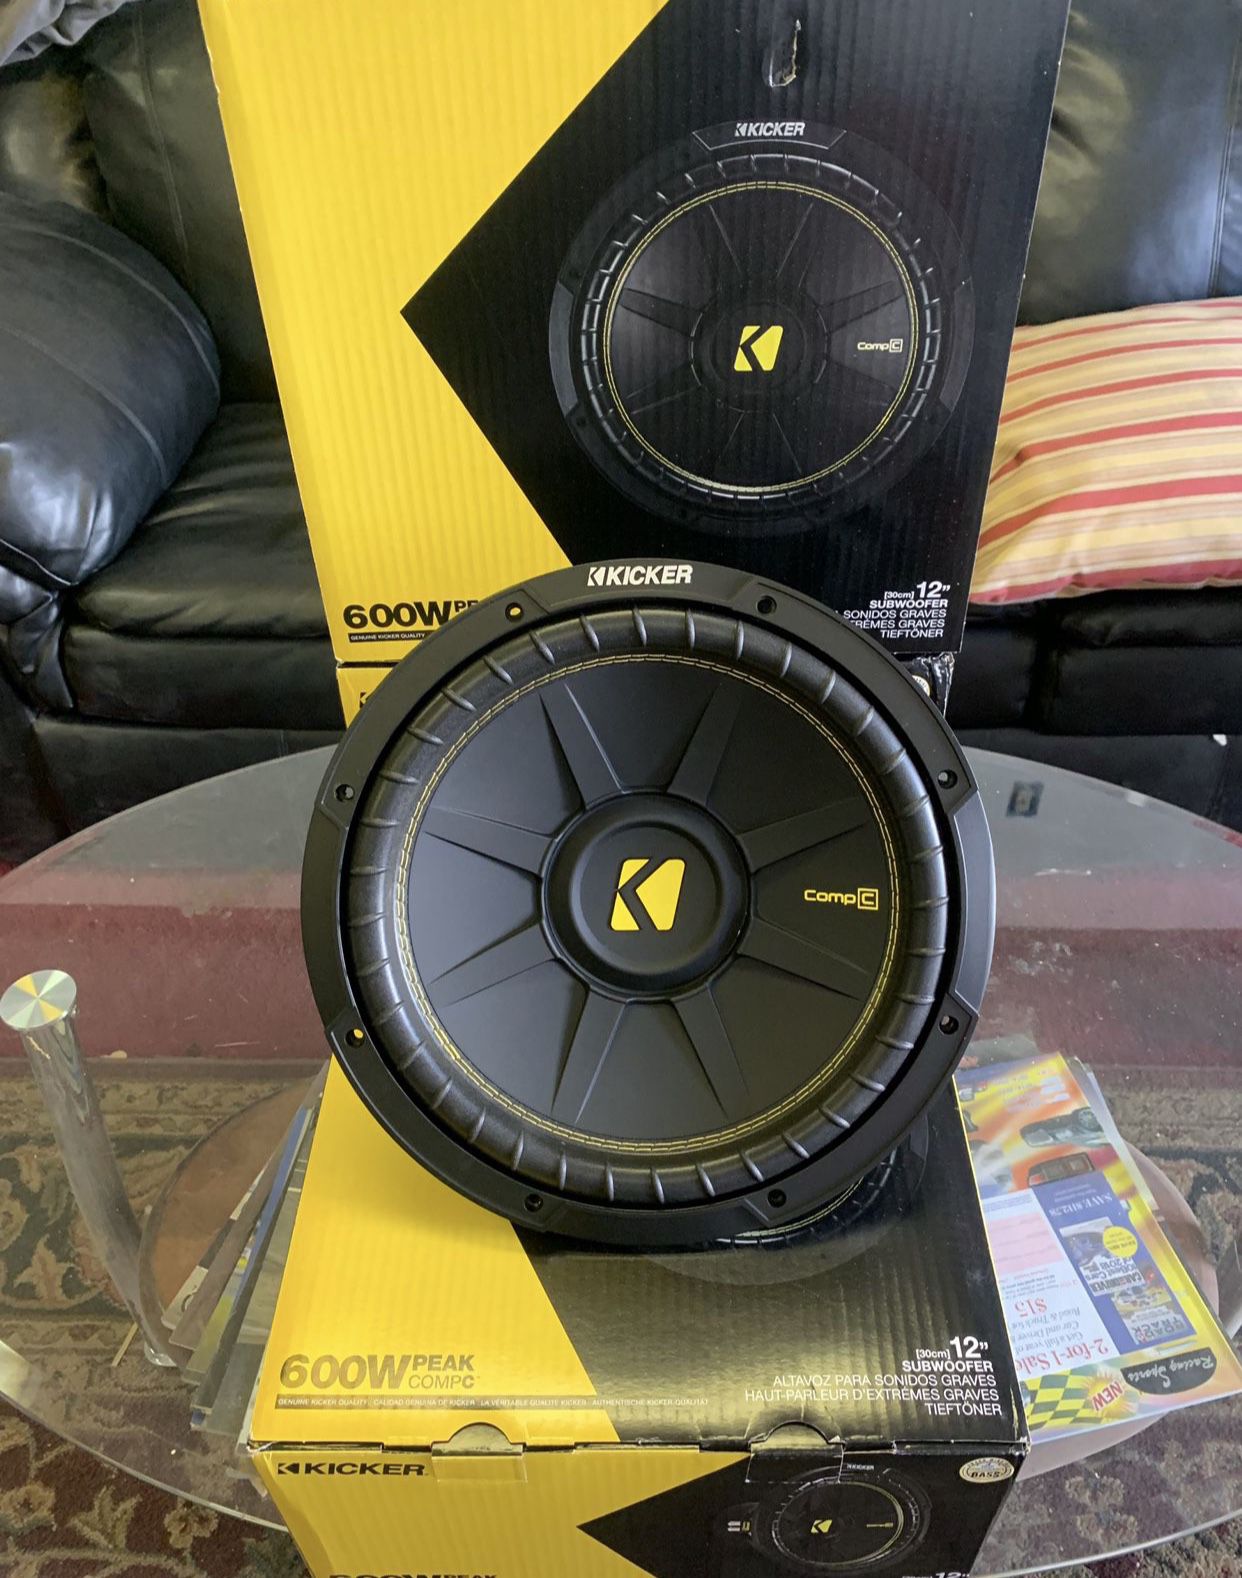 Kicker Car Audio . 12 Inch Car Stereo Subwoofer . New Year 5 Day Super Sale ! $69 Each While They Last New